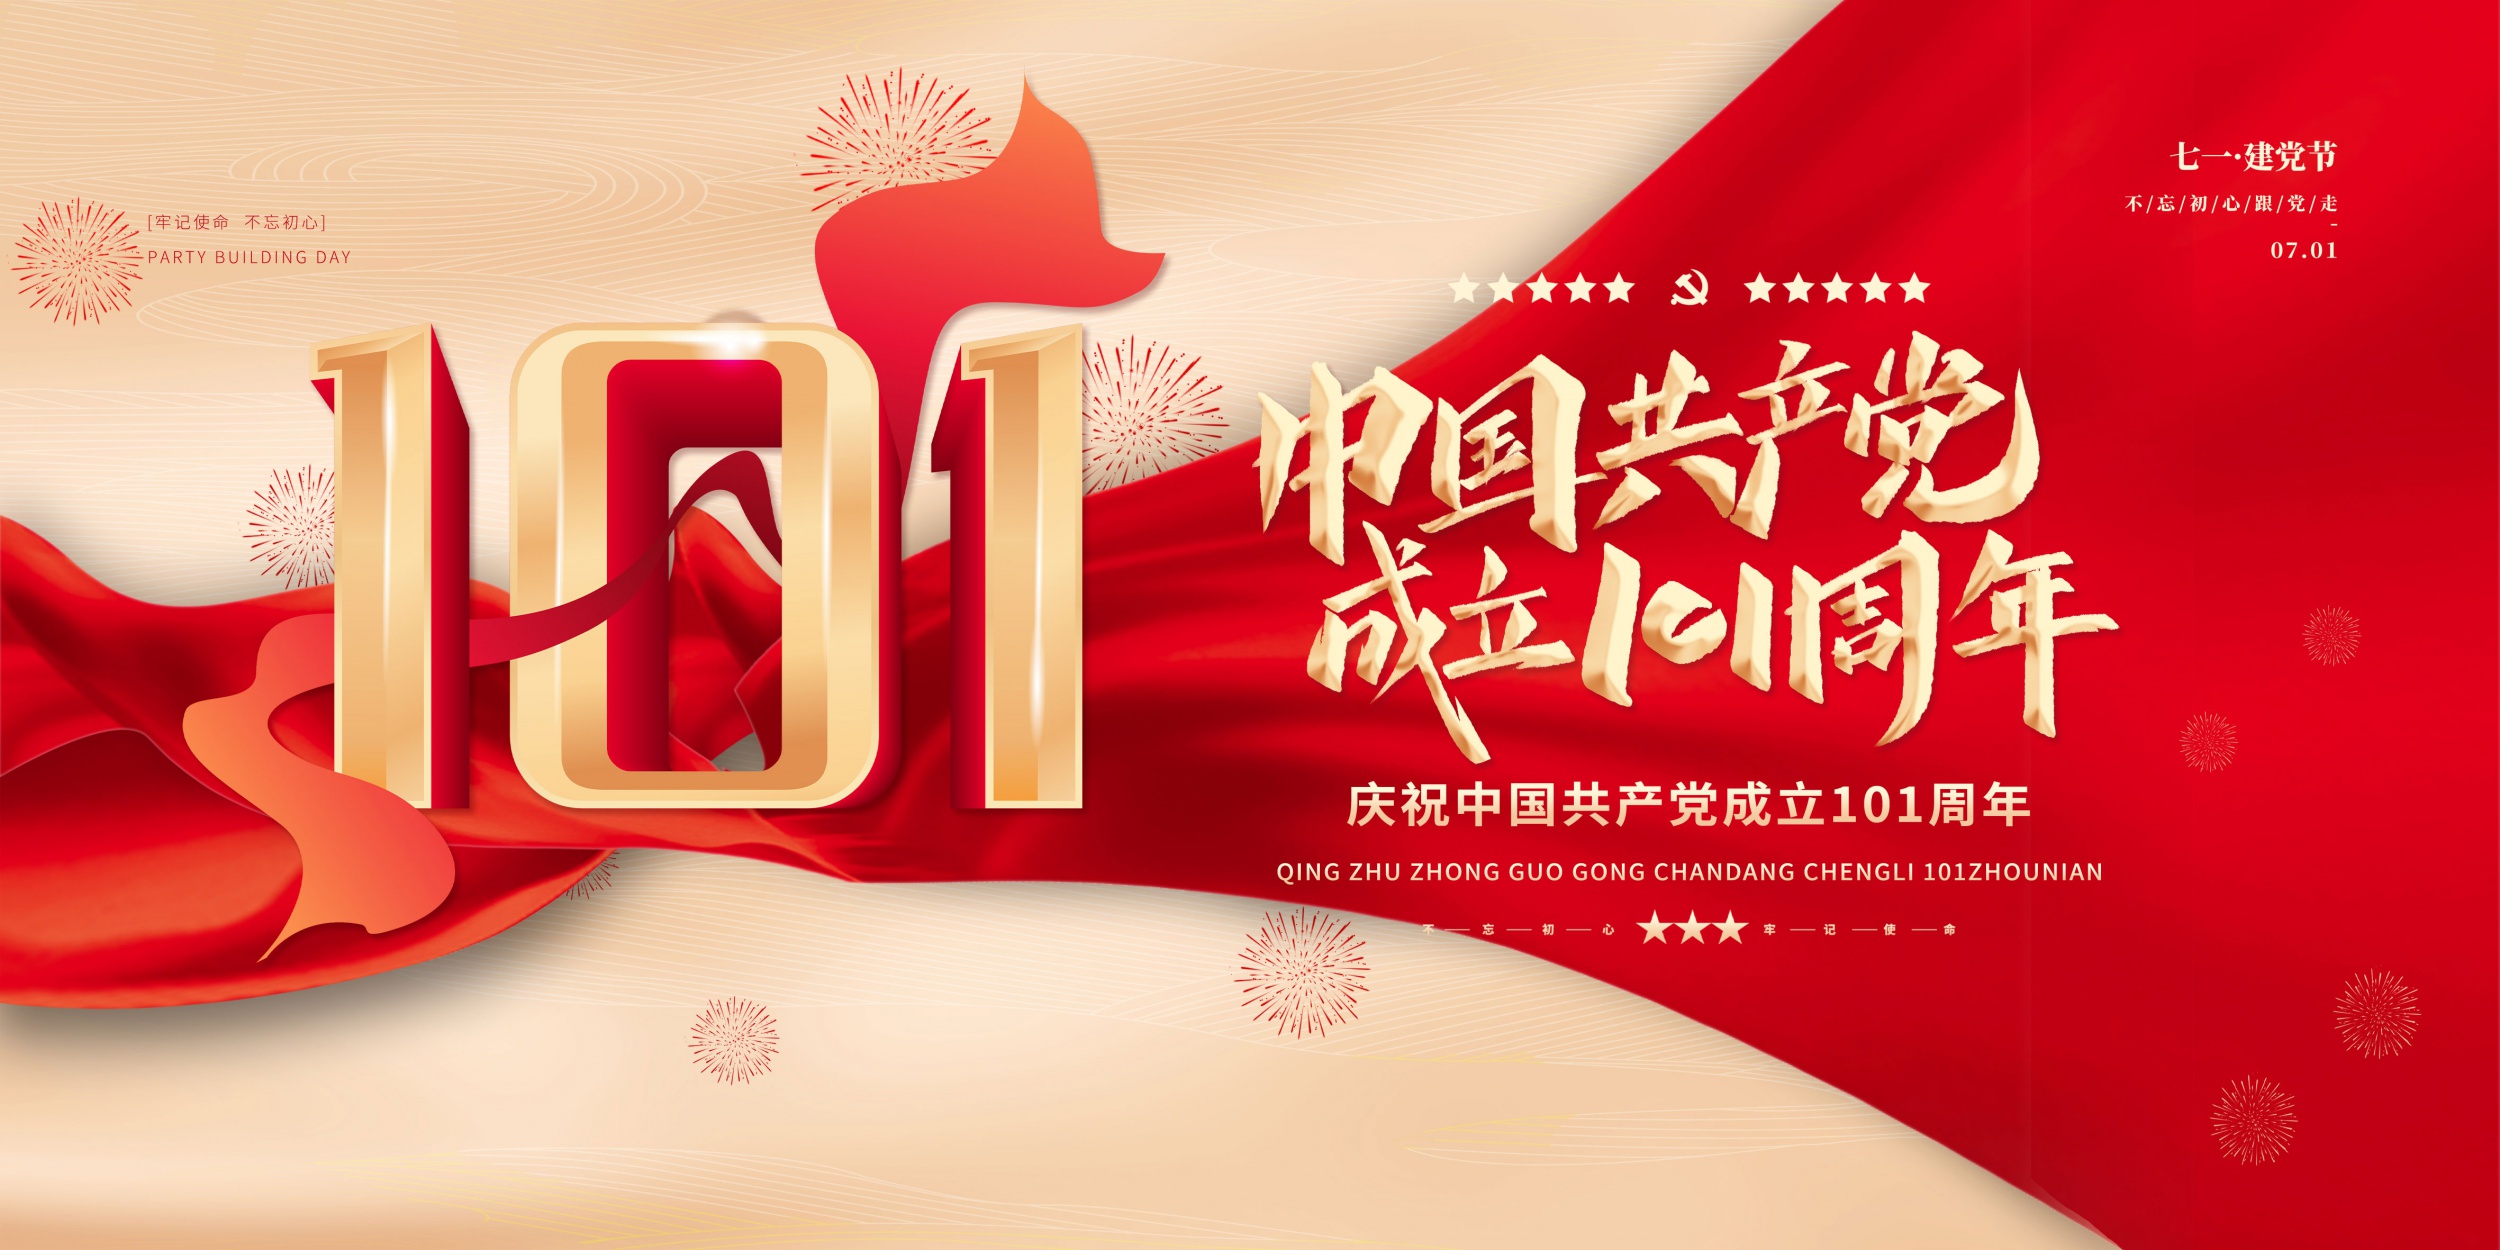 Warmly congratulate the 101st anniversary of the founding of the Communist Party of China!